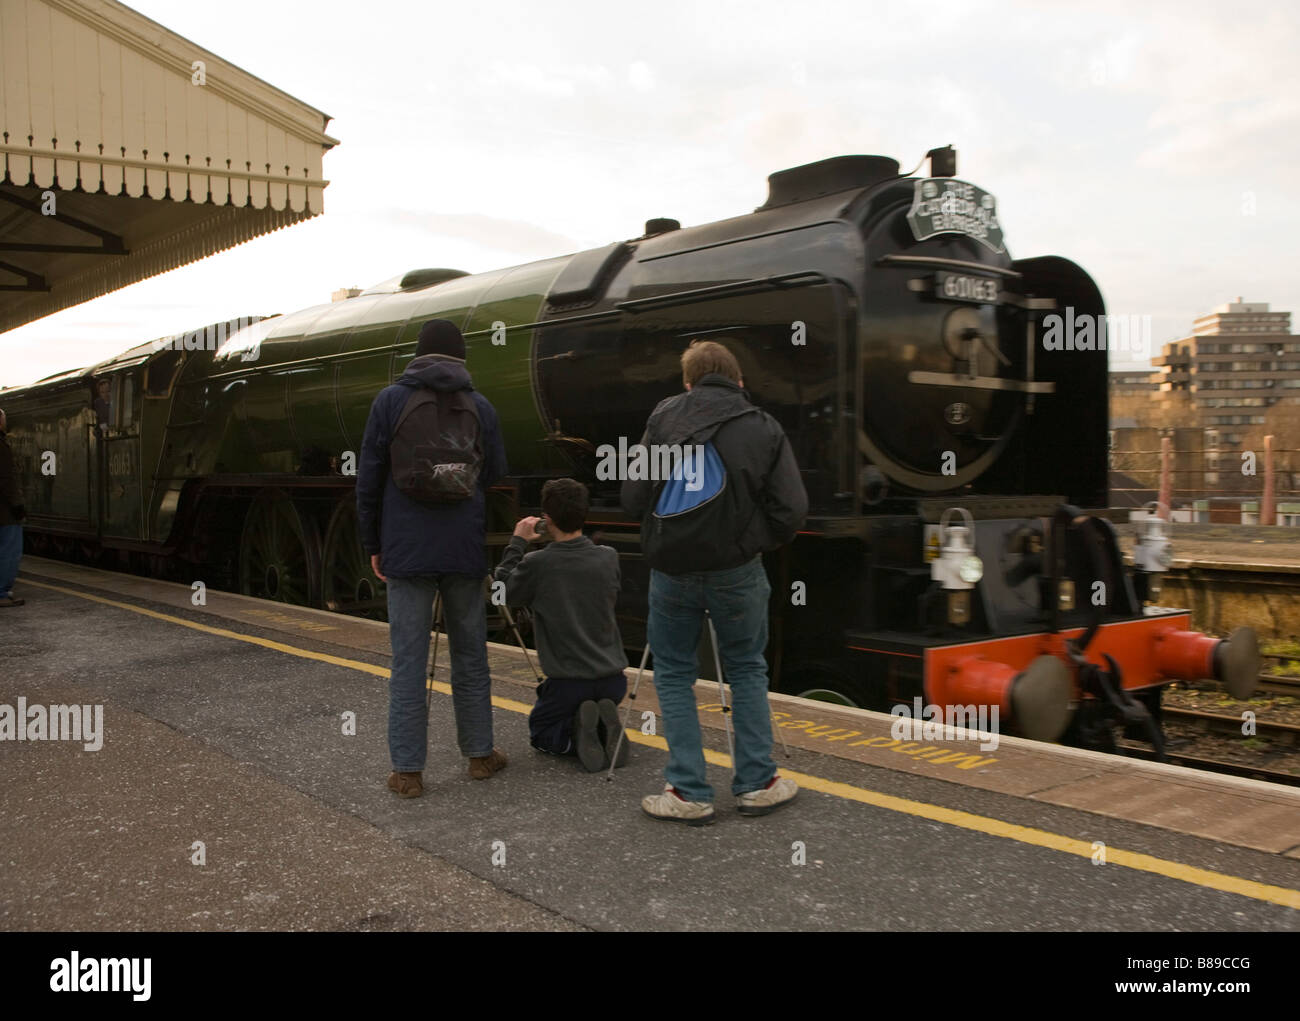 'Tornado' a Peppercorn A1 Pacific steam engine passes through Clapham Junction on route to Waterloo Stock Photo